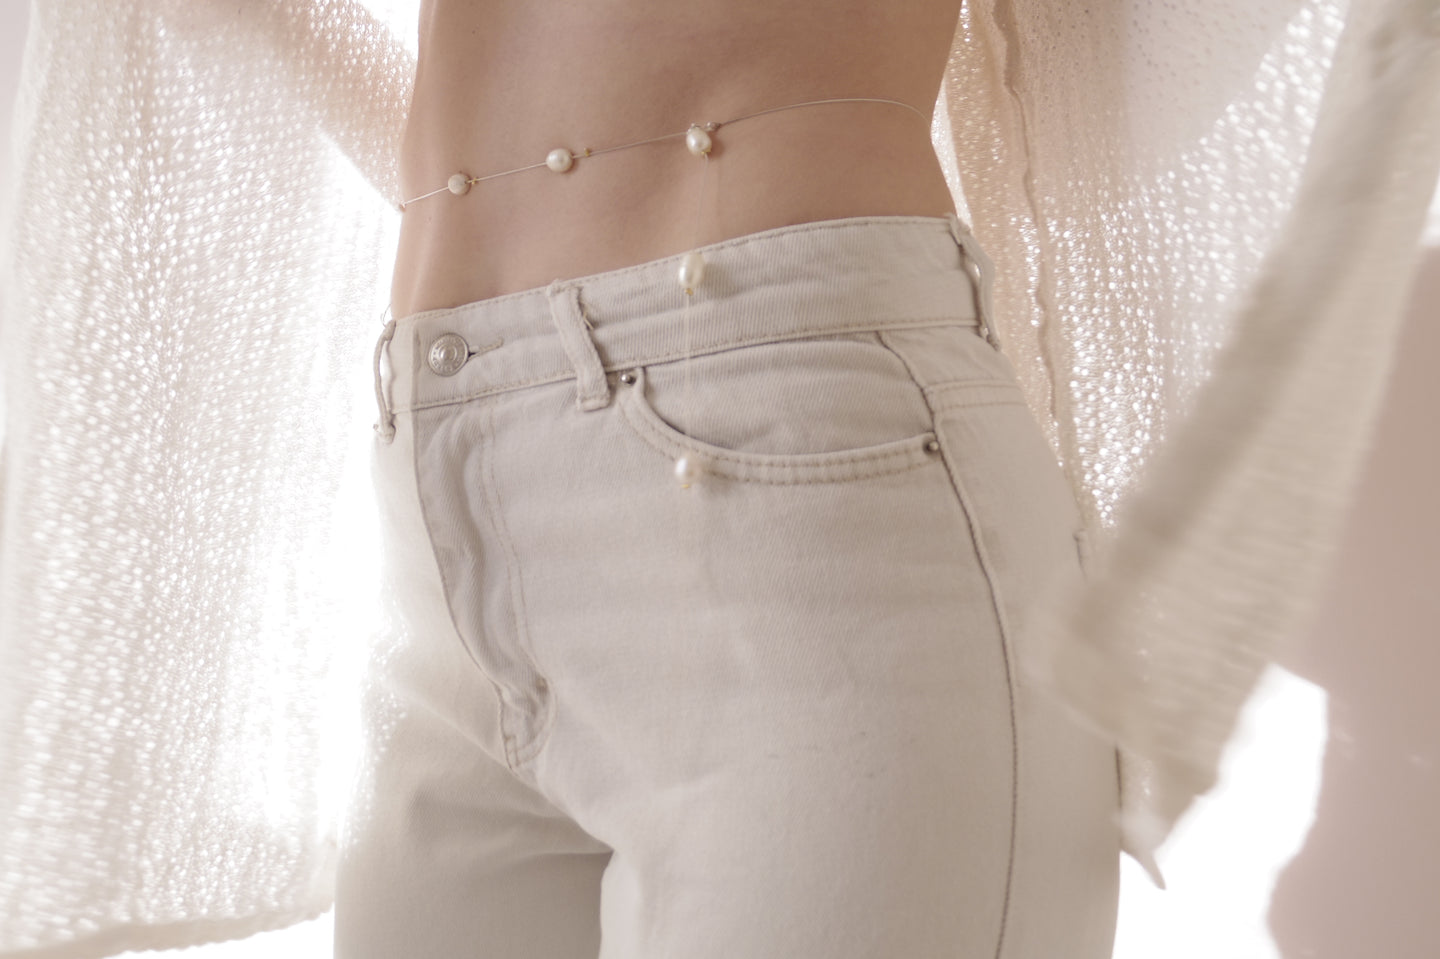 Pearls & silver belly chain